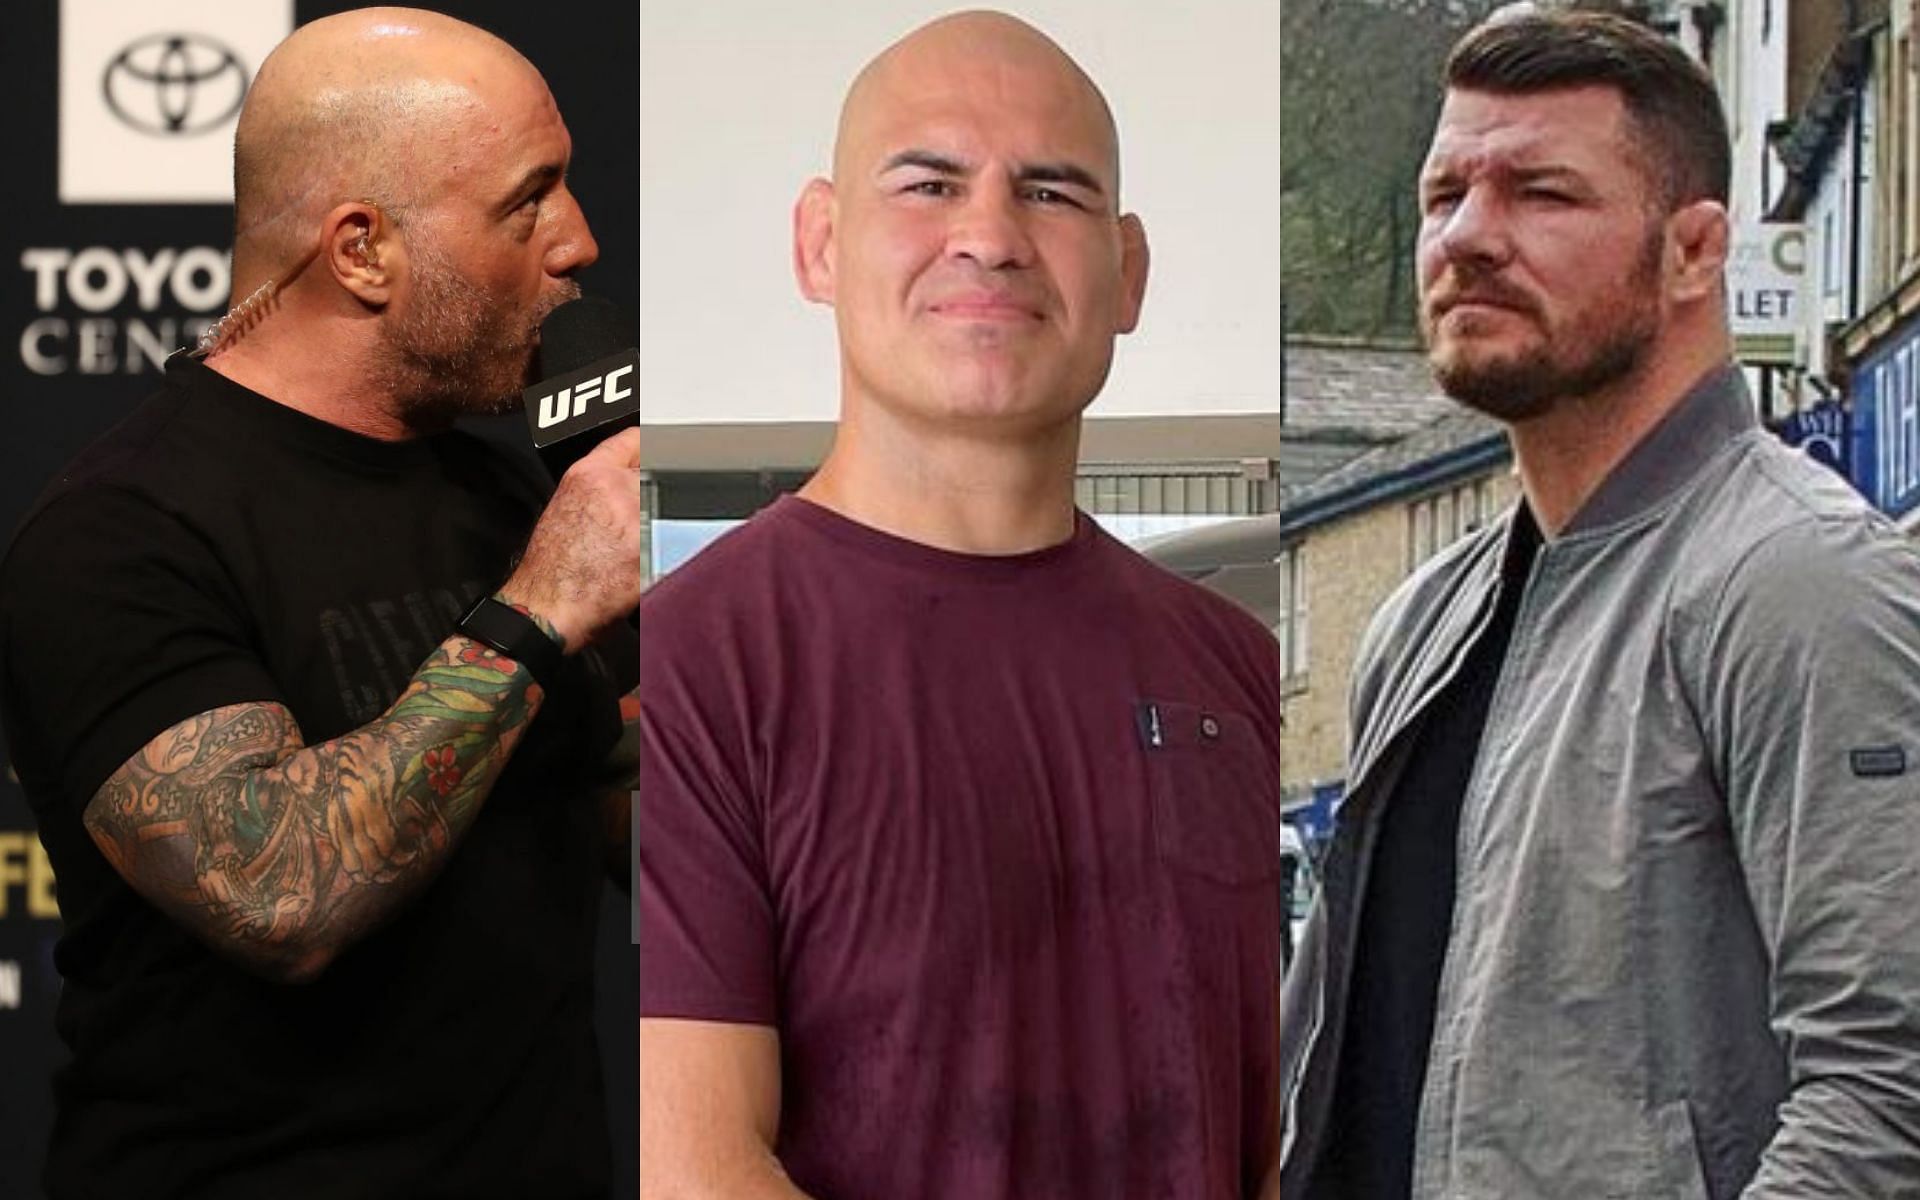 (L to R) Joe Rogan via Getty, Cain Velasquez and Michael Bisping via Instagram @officialcainvelasquez and @mikebisping